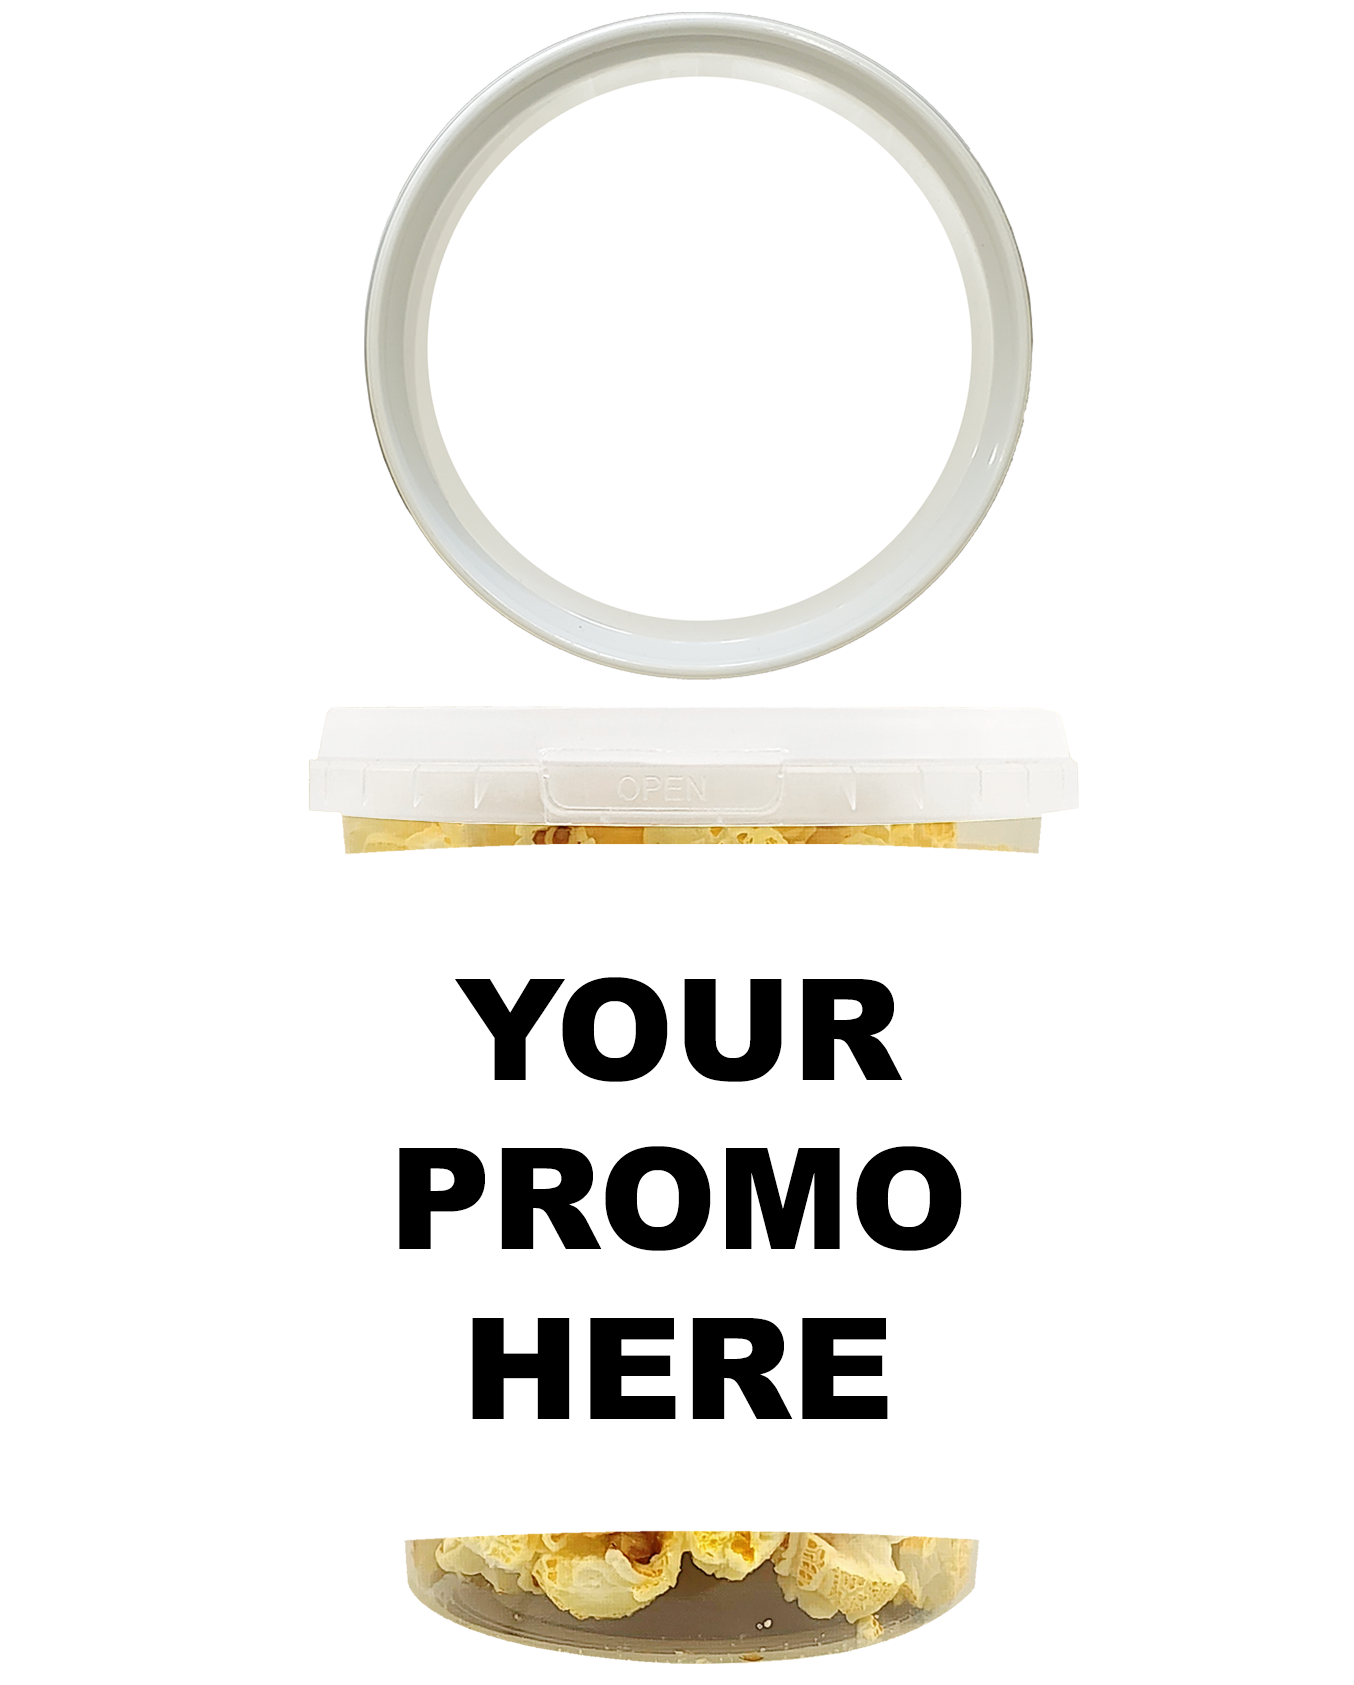 Promo Pop™ - Kettle Corn Classic (as low as $3.99 per bucket) Case of 12 Price